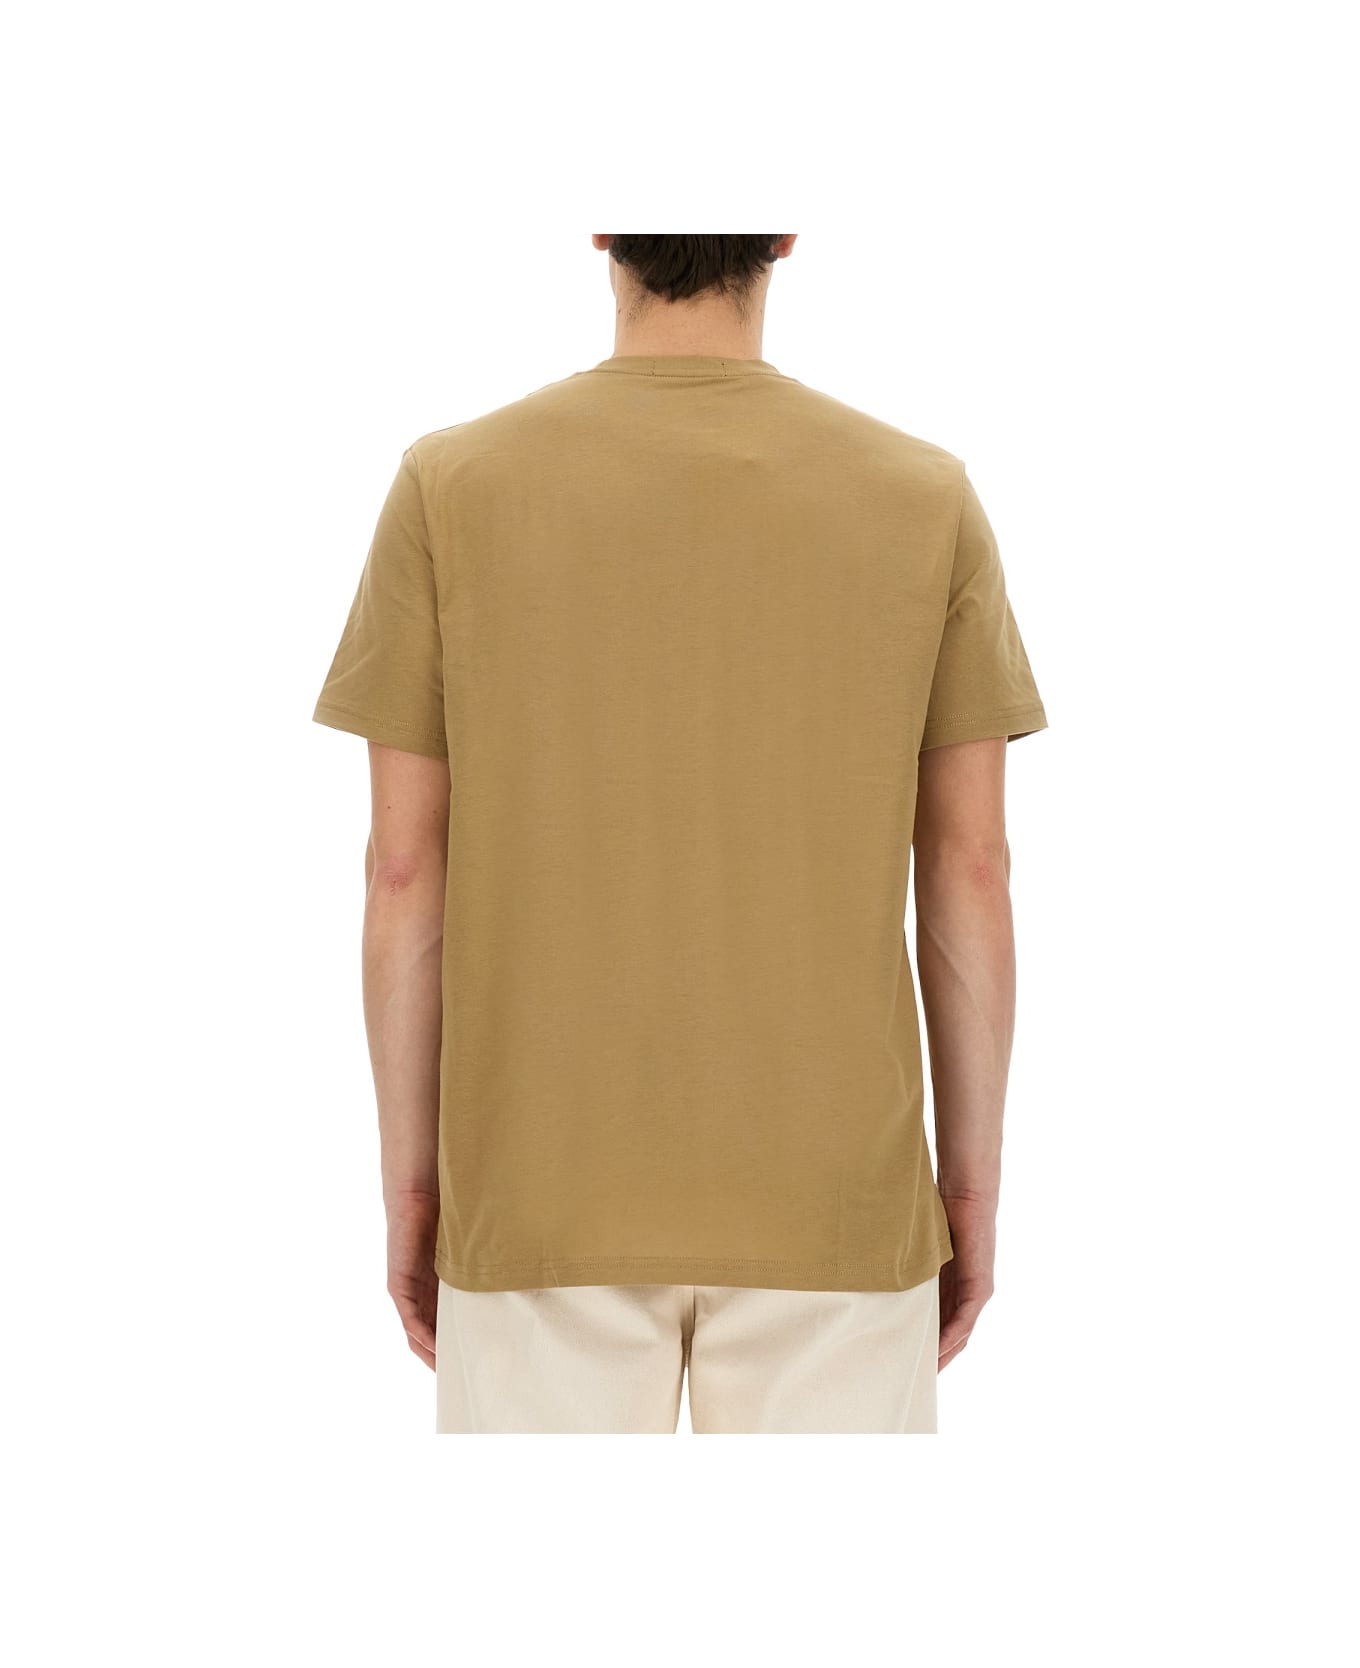 Fred Perry T-shirt With Logo - BEIGE